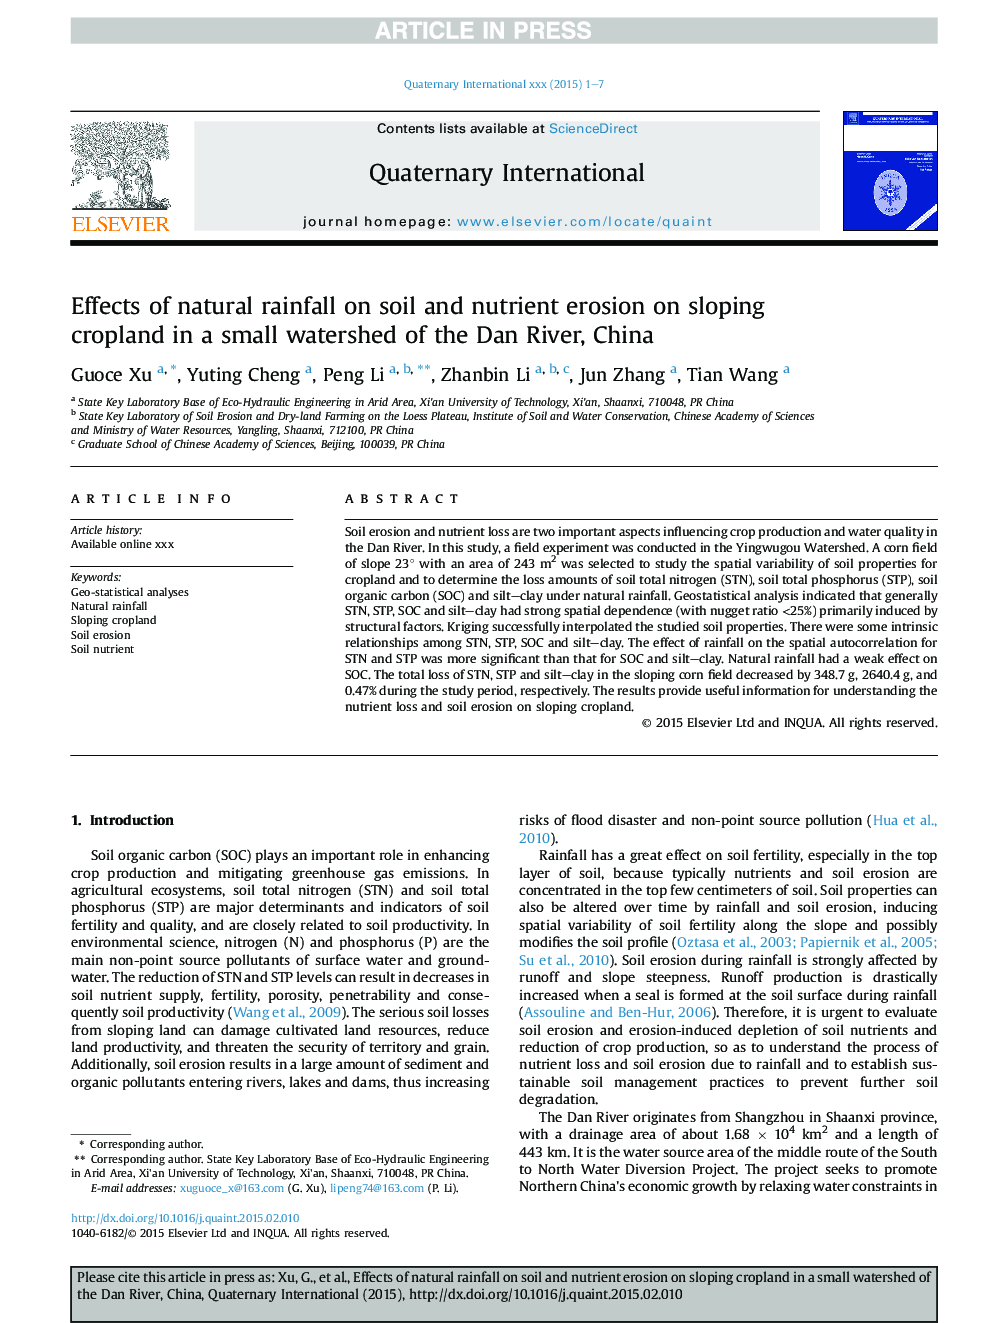 Effects of natural rainfall on soil and nutrient erosion on sloping cropland in a small watershed of the Dan River, China